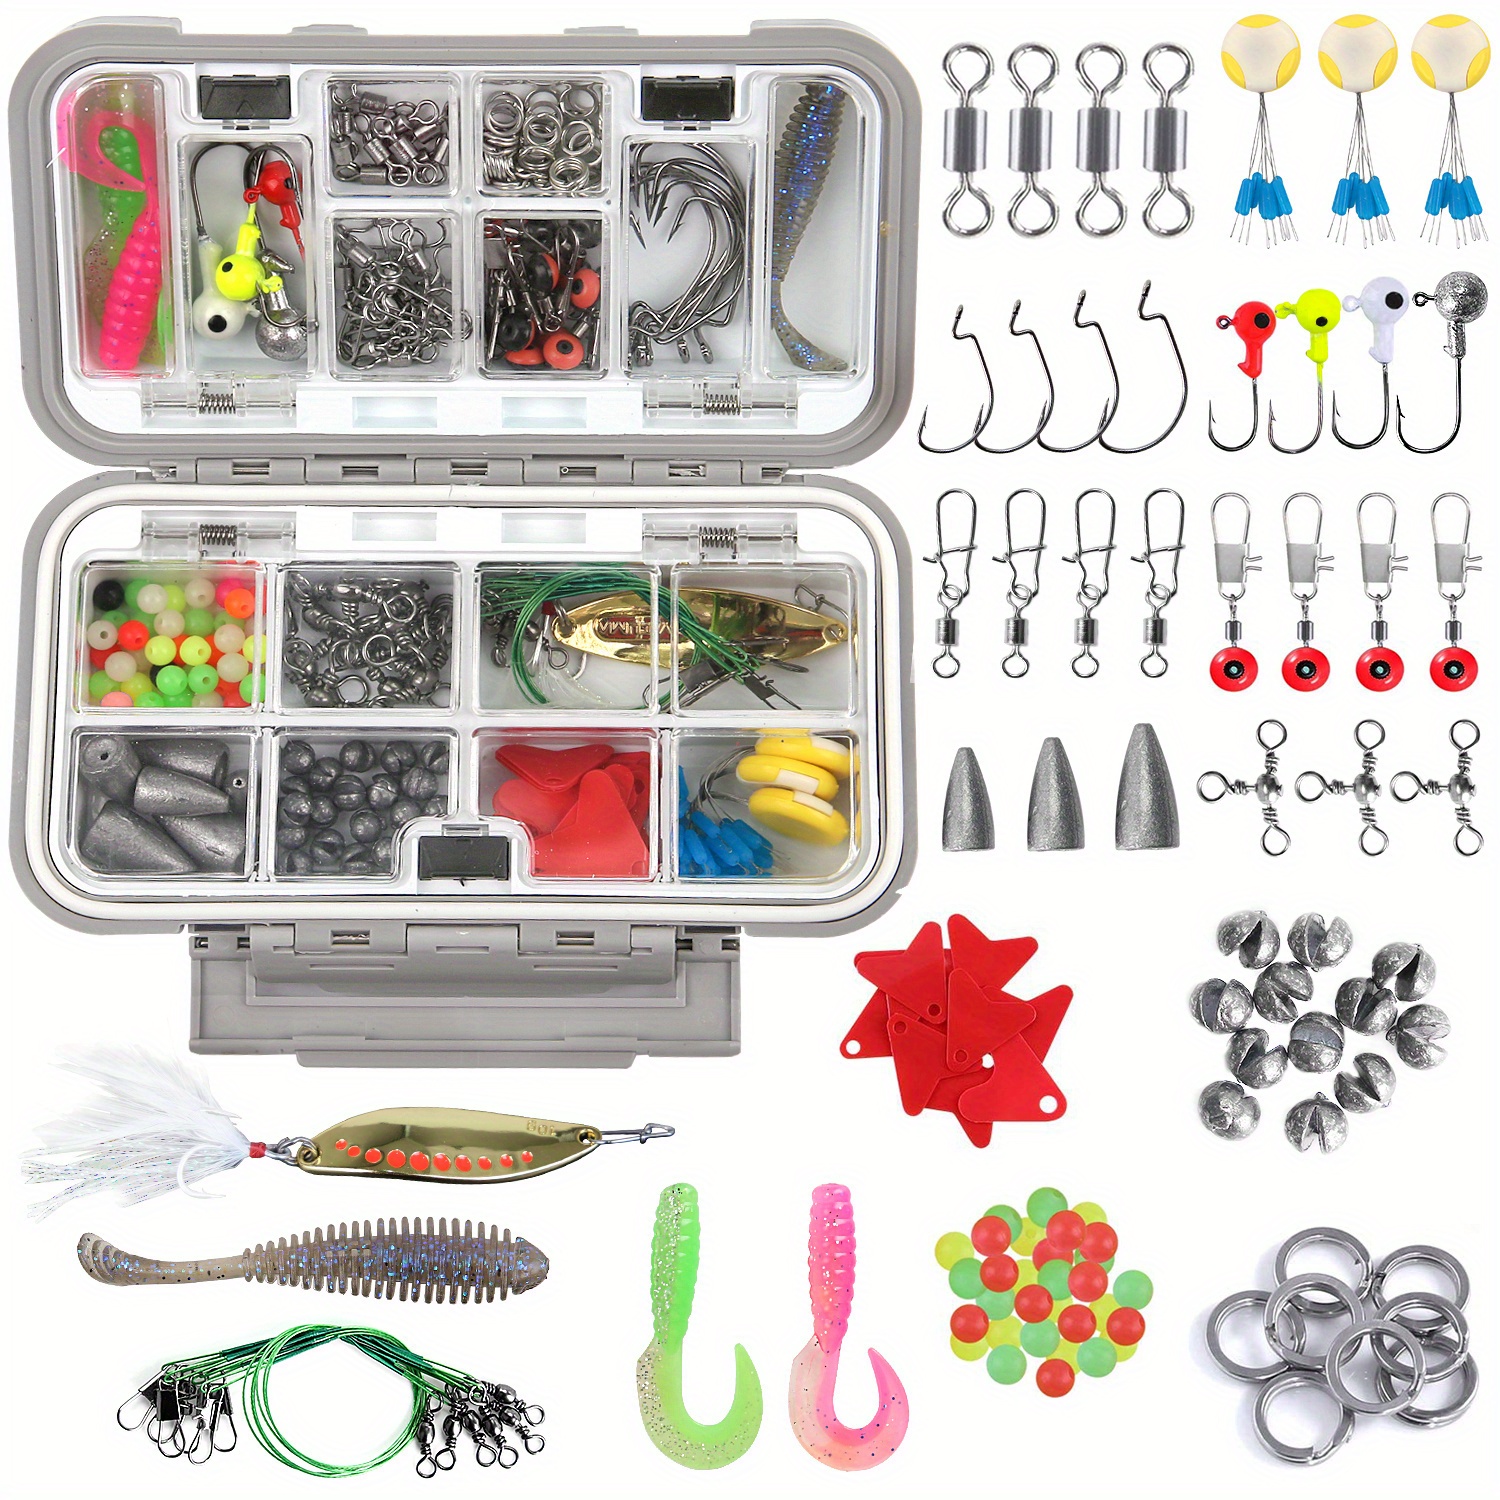 192/308pcs Fishing Accessories Kit, Fishing Tackle Kit With Storage Box  Including Jig Hooks, Bullet Weights, Sinker, Slides, Bobbers, Suitable For  Fre